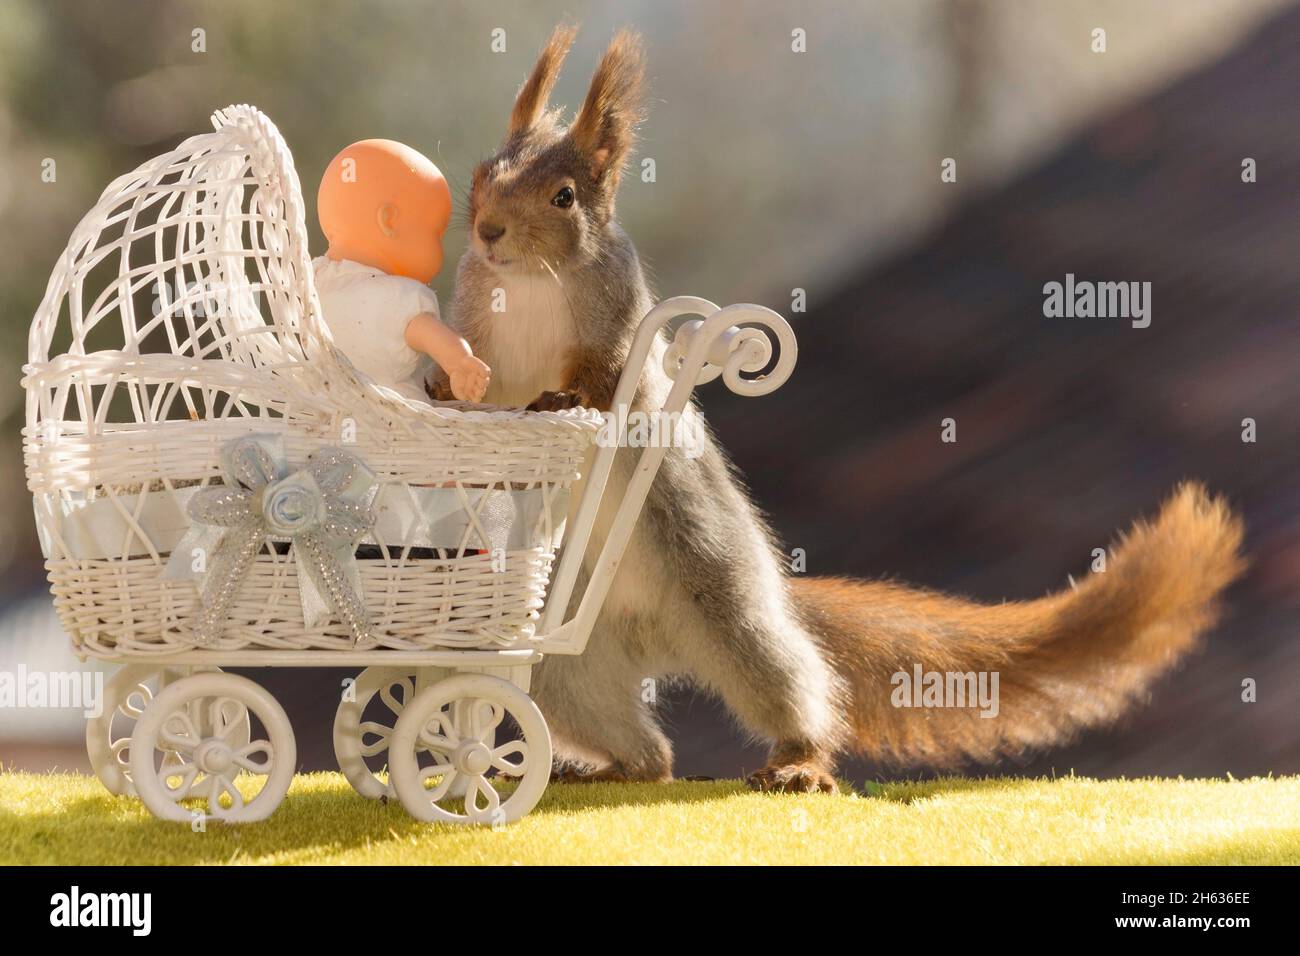 red squirrel looks at a baby in pram Stock Photo